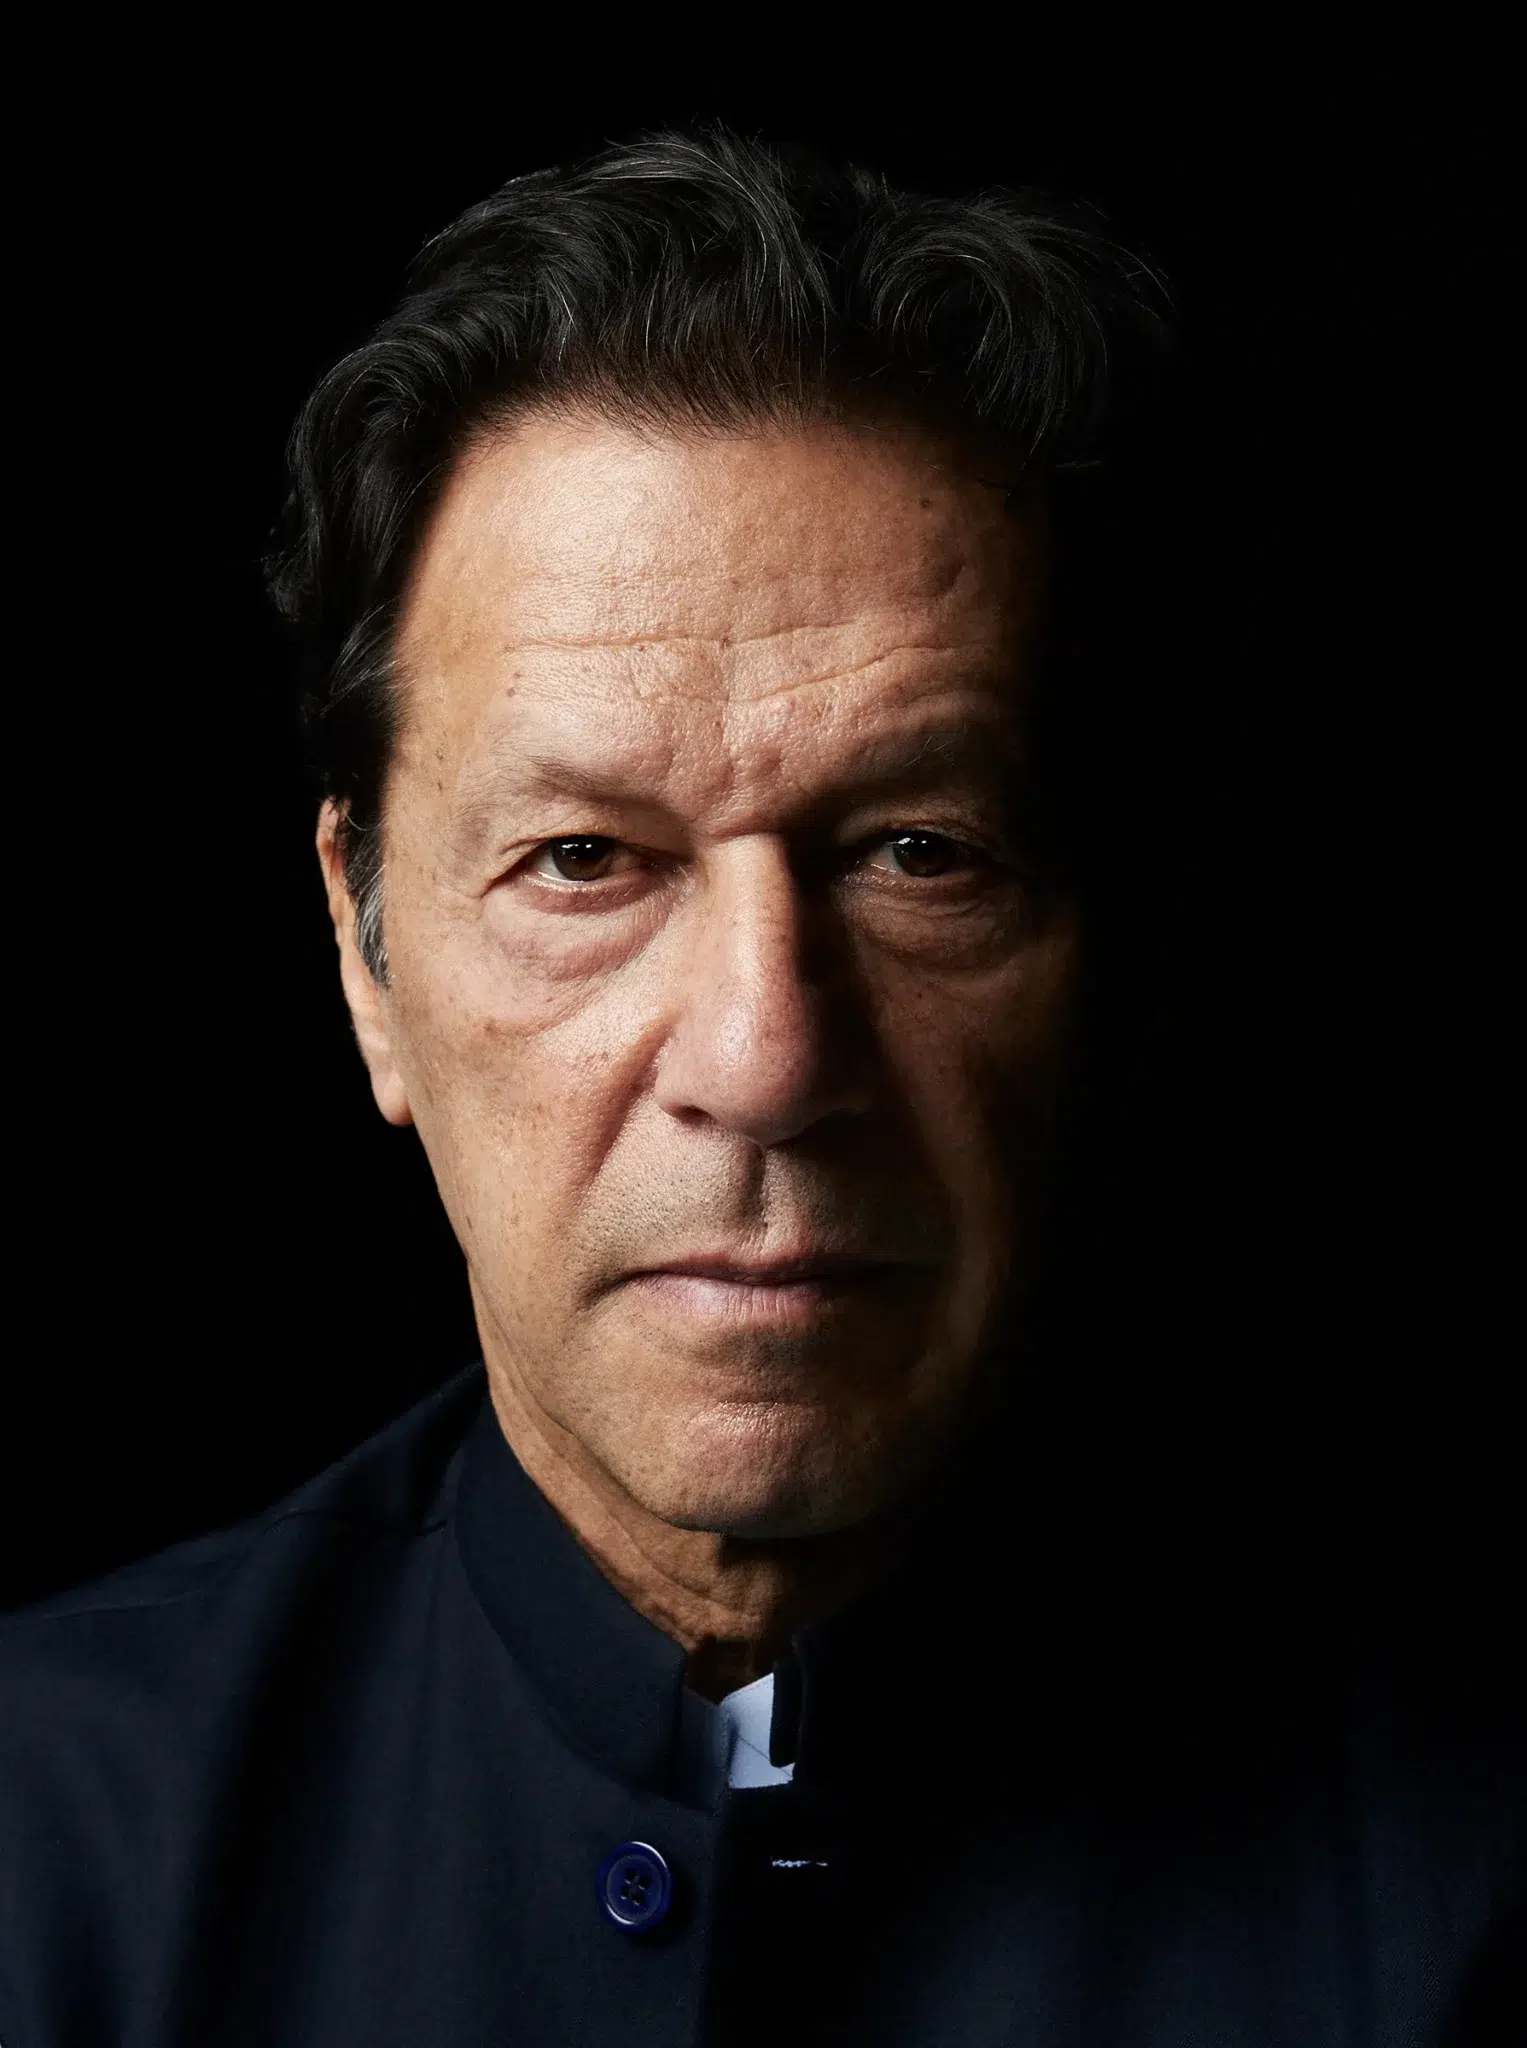 Lahore High Court orders equal media coverage for Imran Khan